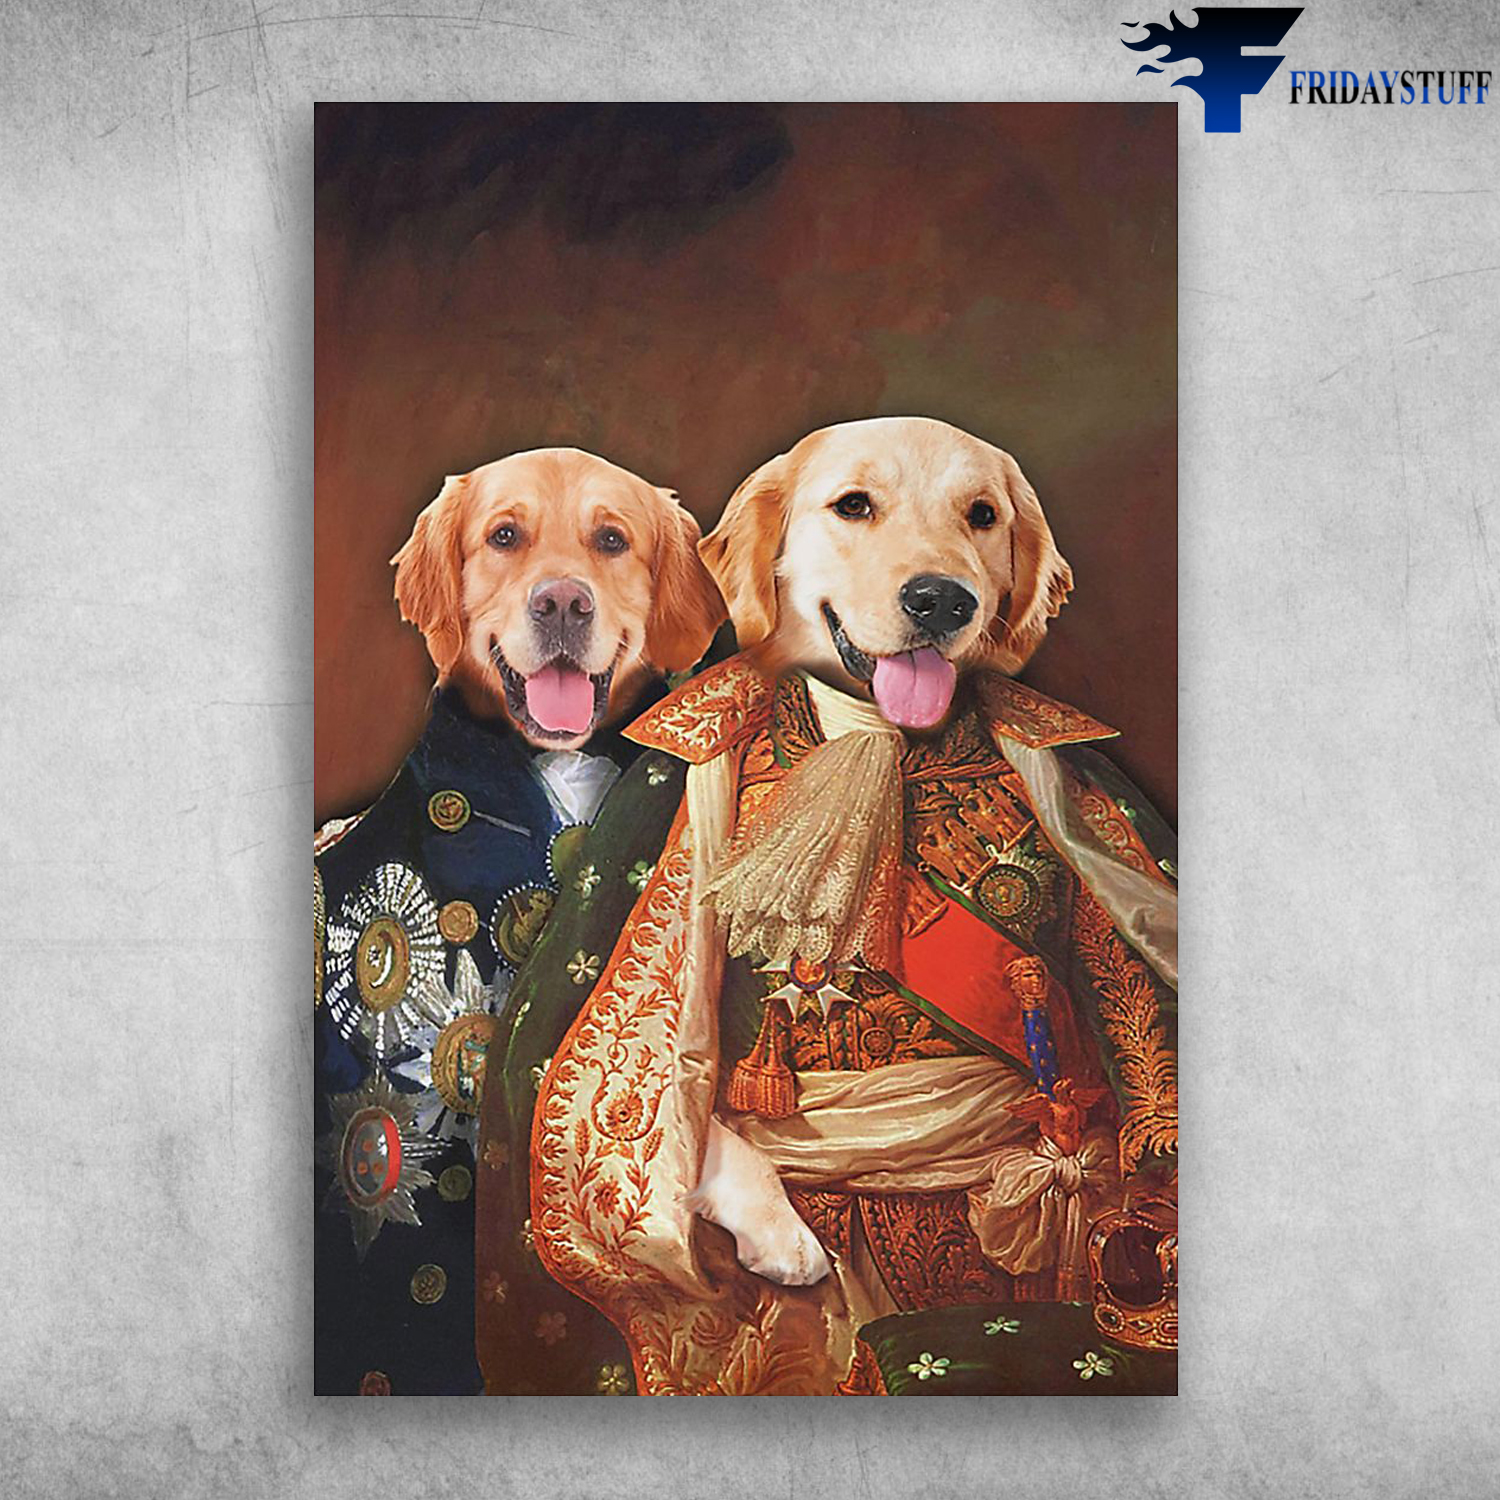 Two Funny Golden Retriever Dog Cover Royal Funny Pet In Royal Costume